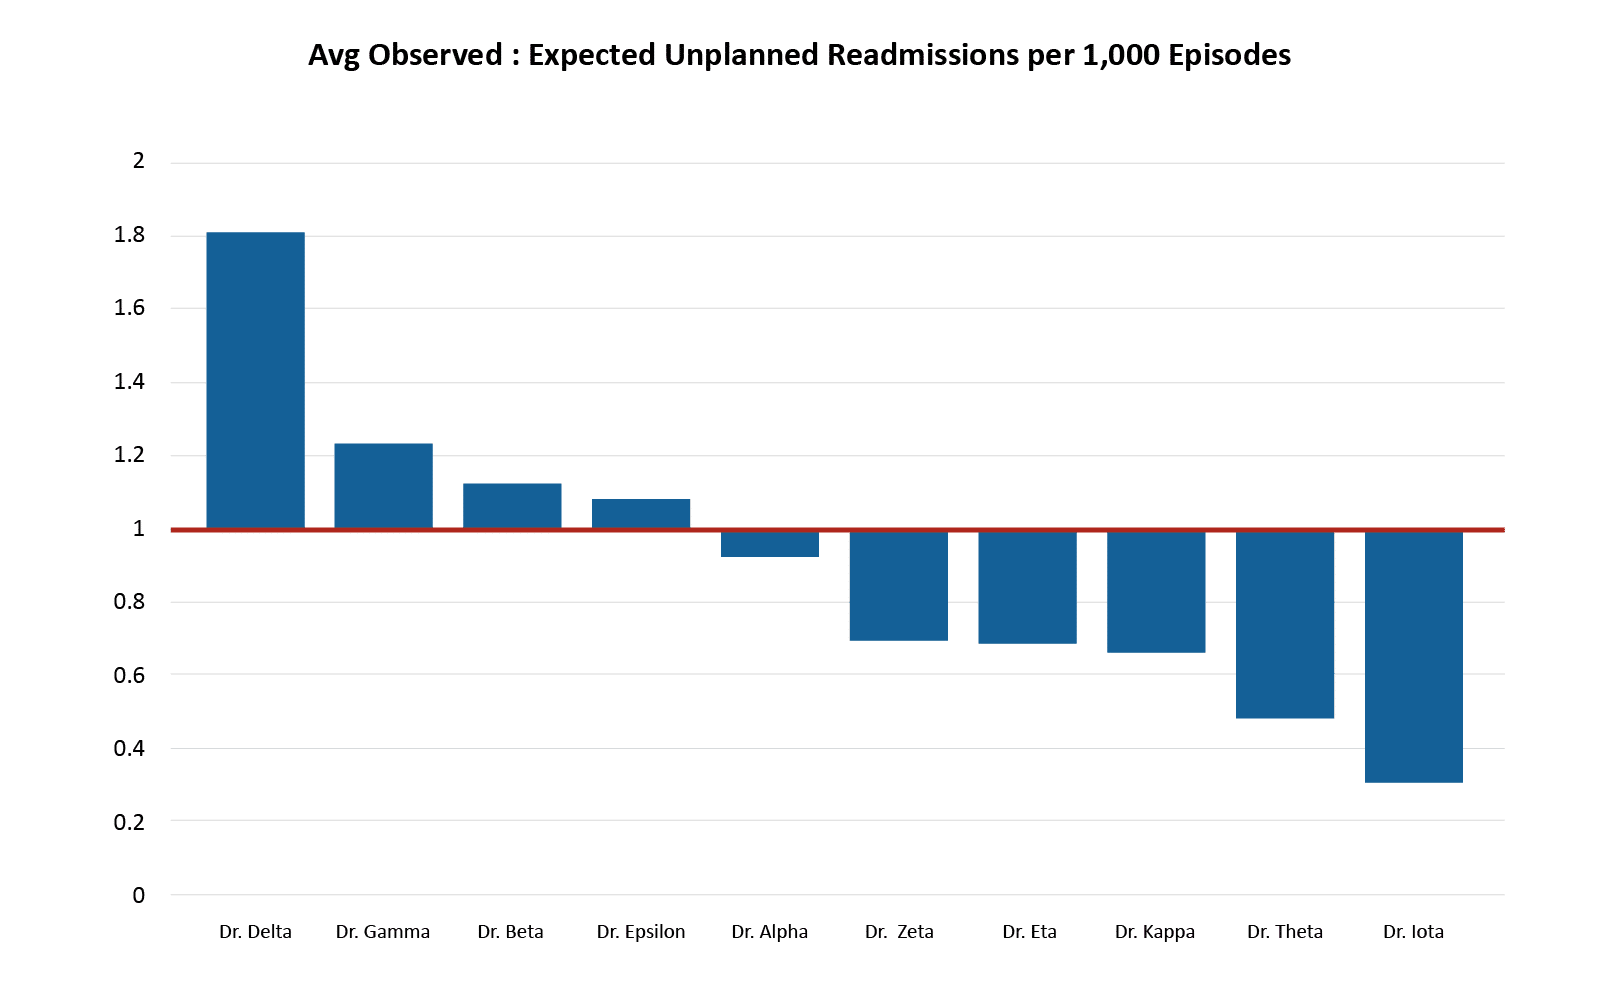 Avg Observed: Expected Unplanned Readmissions per 1K Episodes